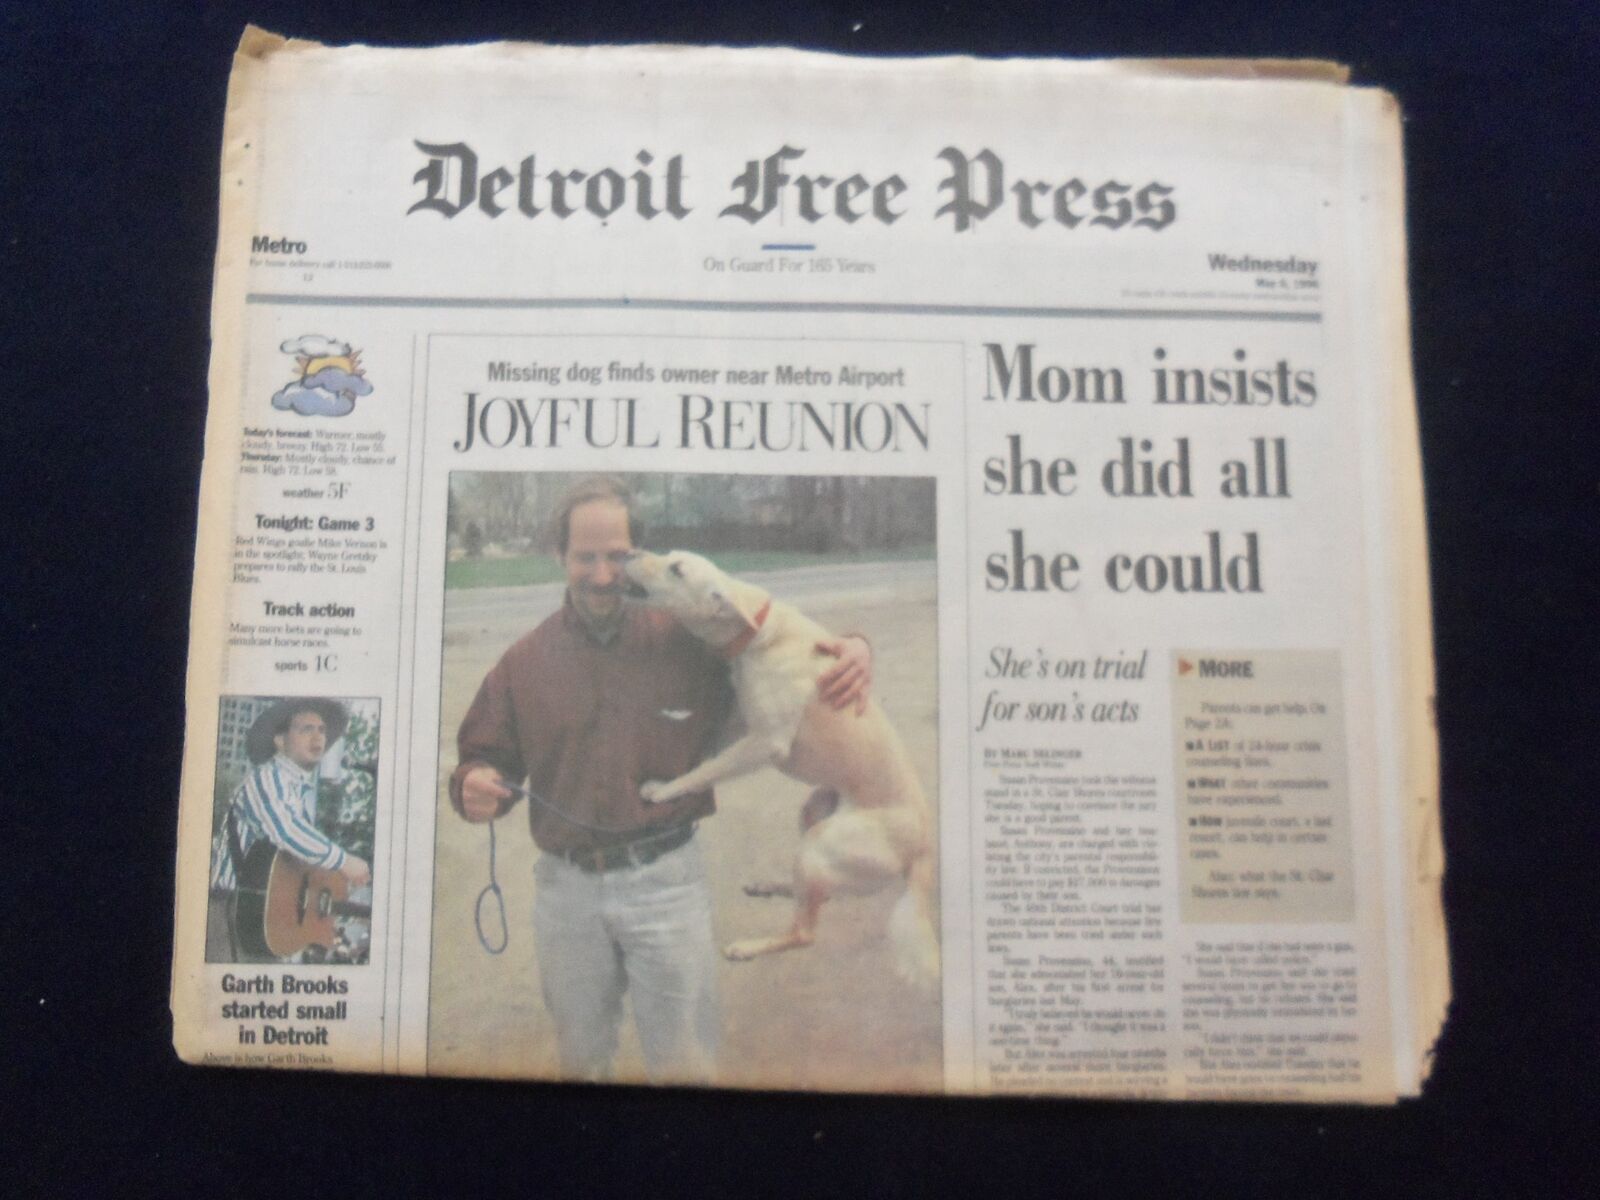 1996 MAY 8 DETROIT FREE PRESS NEWSPAPER-GARTH BROOKS STARTED IN DETROIT- NP 7281